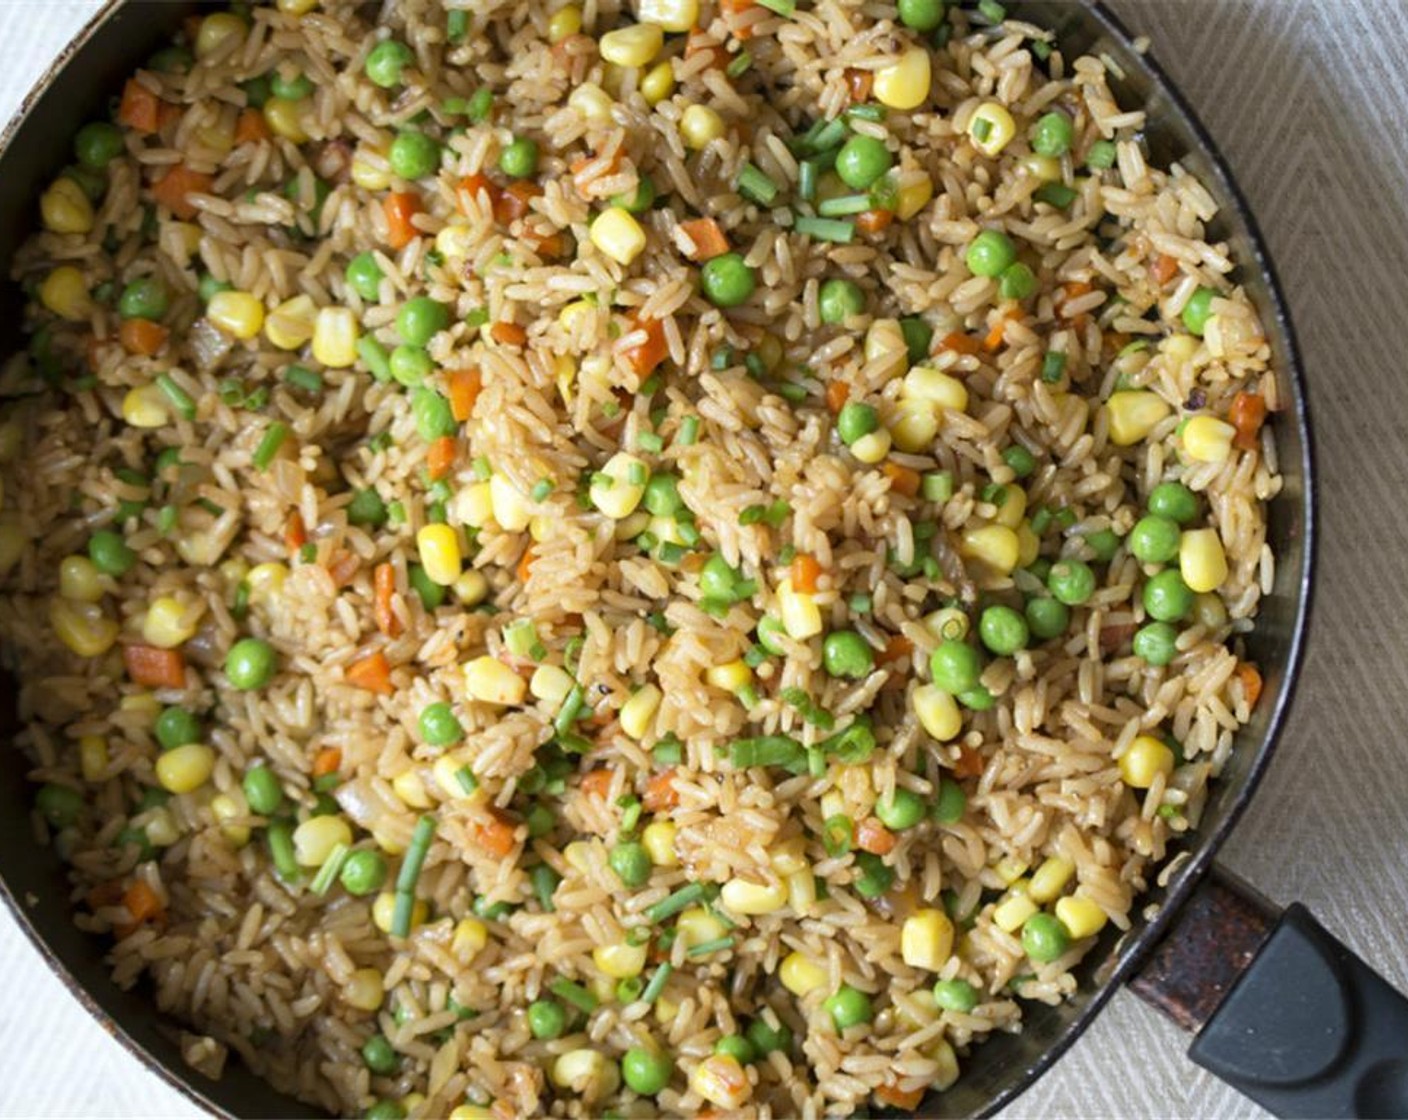 step 3 Add cooked rice into the pan with the carrot/onion mixture. Add the Frozen Green Peas (3/4 cup), Frozen Corn Kernels (3/4 cup), Sriracha (1/2 Tbsp), Fish Sauce (1/2 tsp), and Soy Sauce (2 Tbsp). Toss to combine. Keep the heat on low to keep warm.